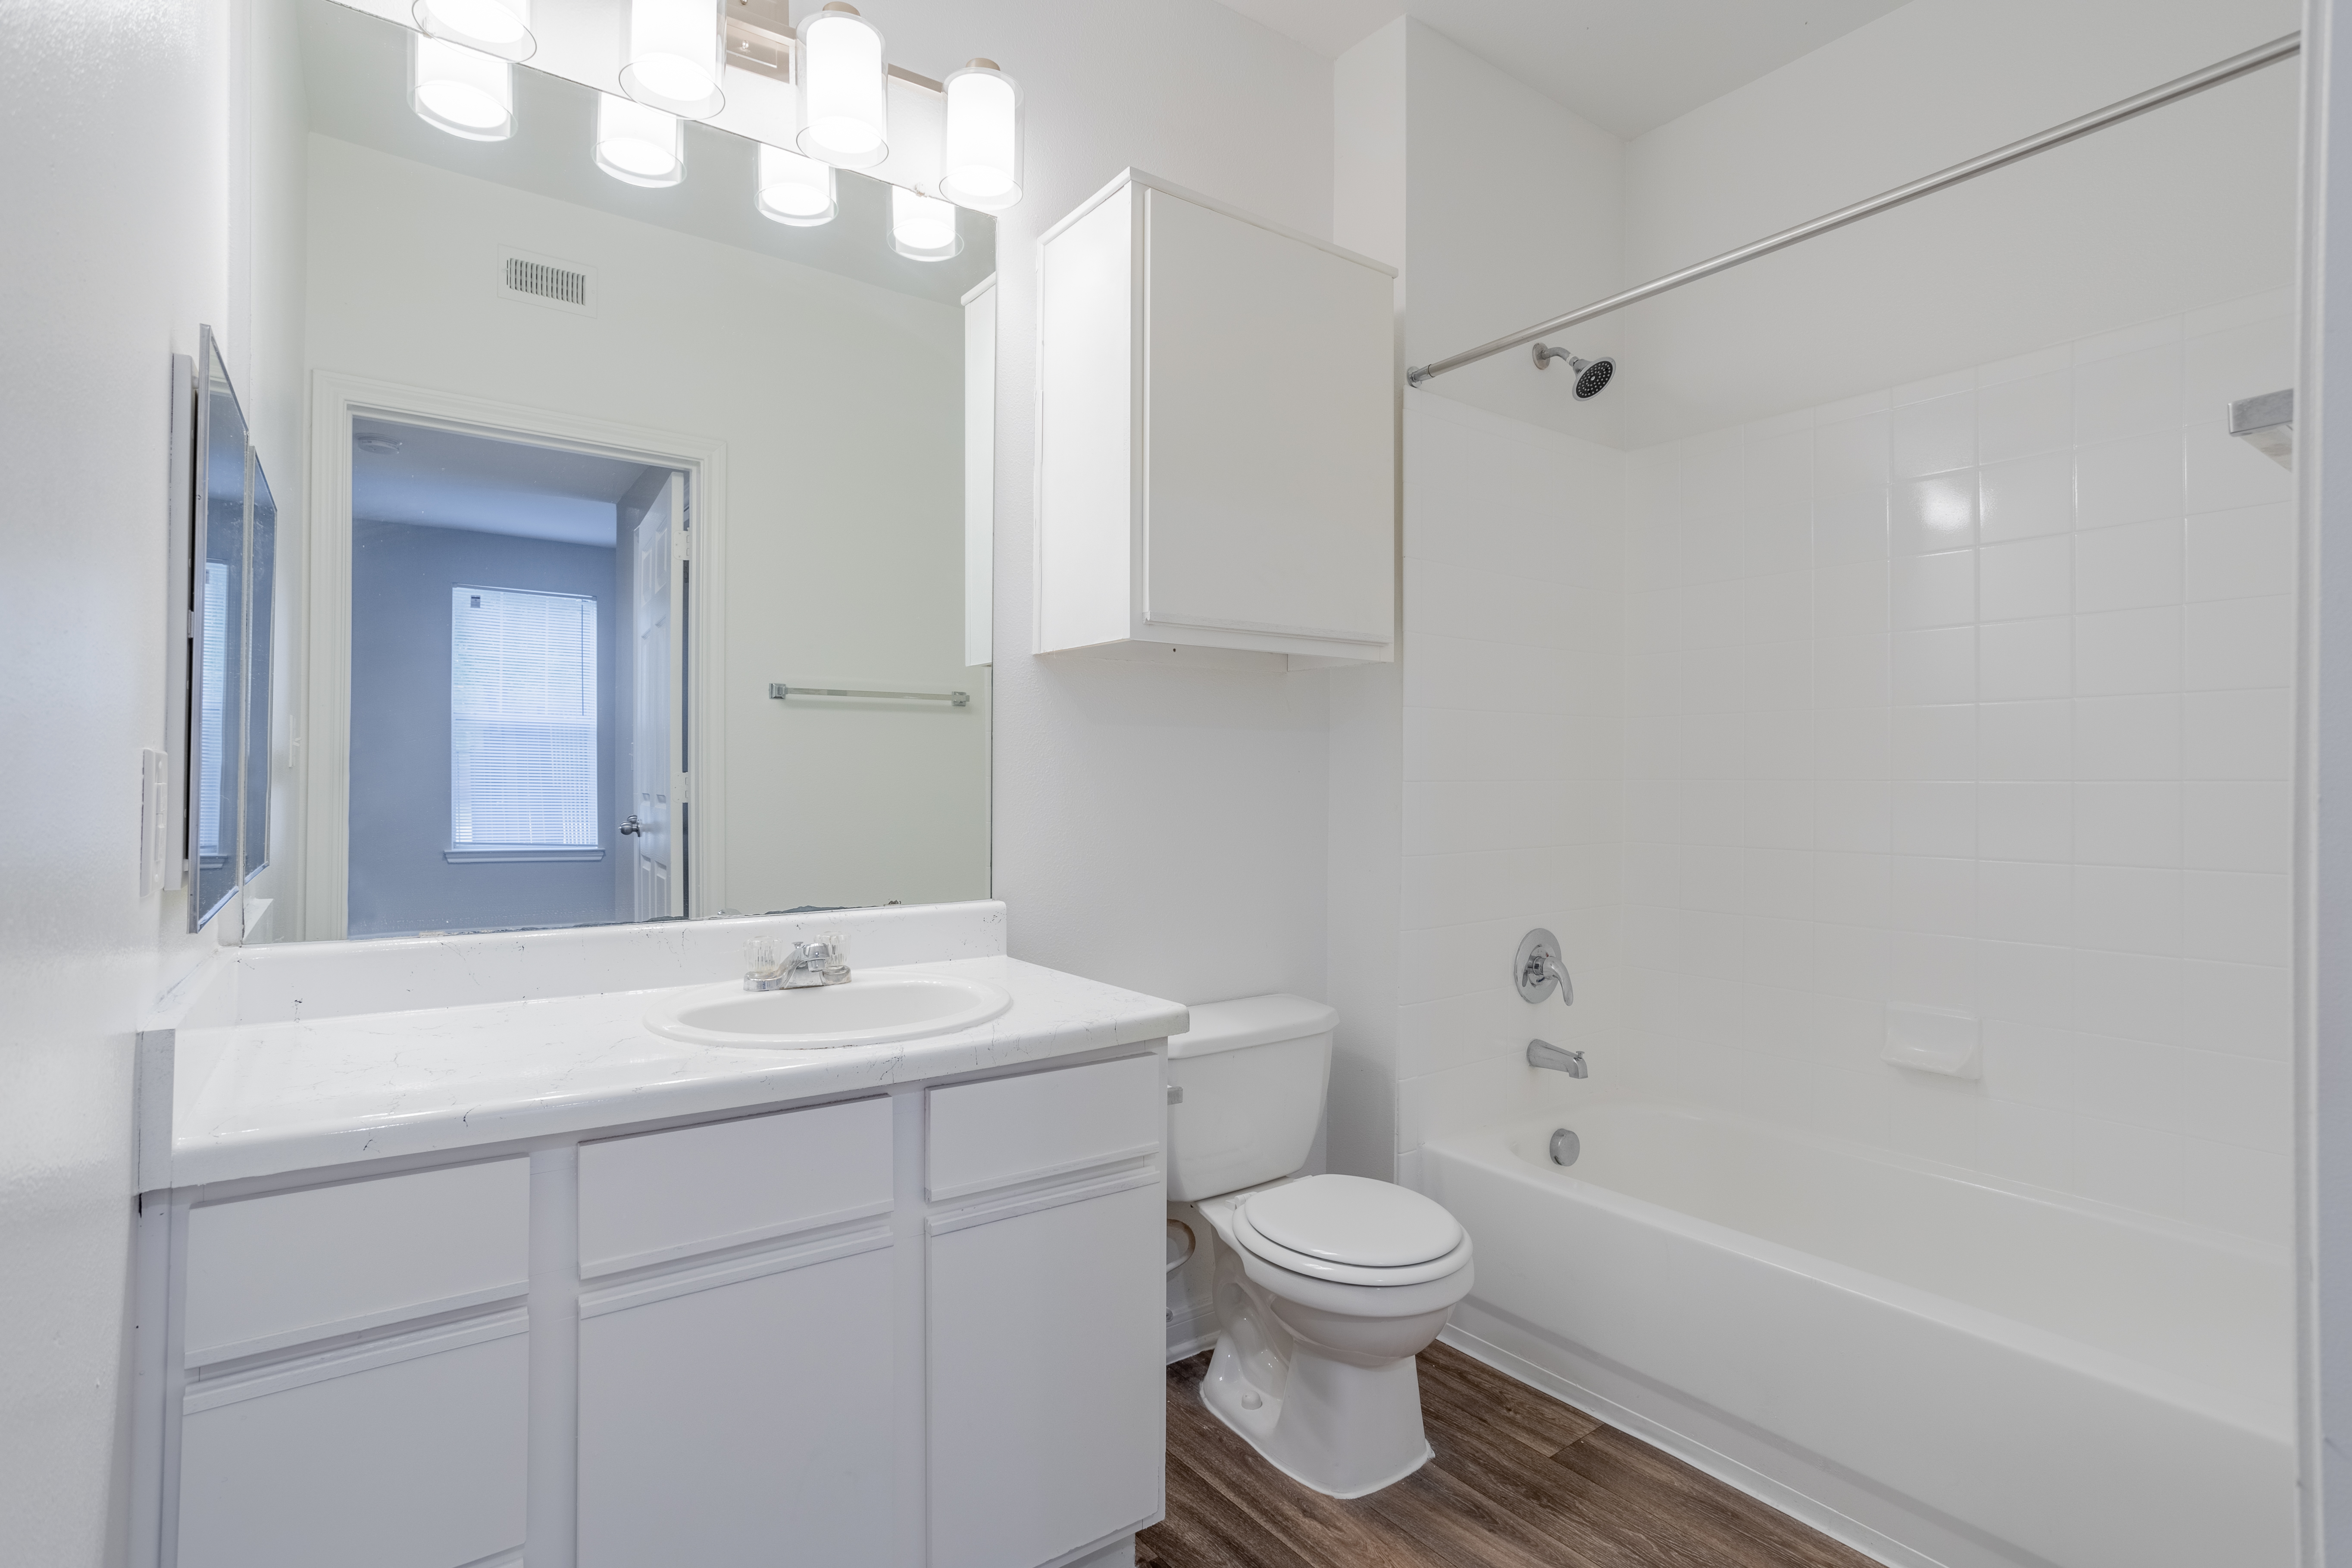 North Forest Trails Apts Houston 1 bedroom apartment bathroom with white cabinets and wood like floo